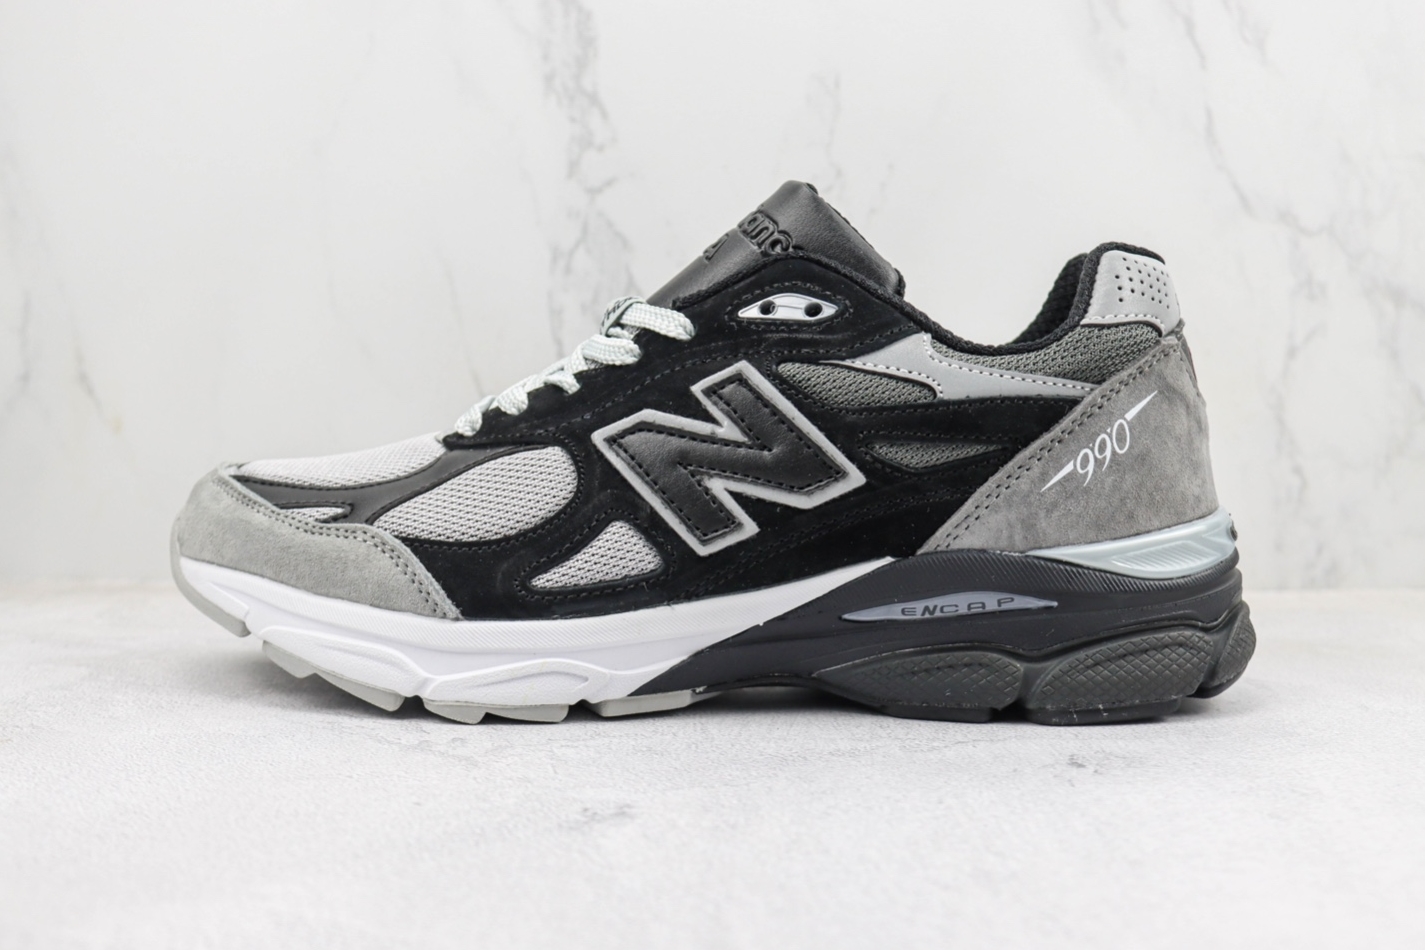 New Balance 990v3 x DTLR Made in USA 'GR3YSCALE' M990DL3 - Shop Now!